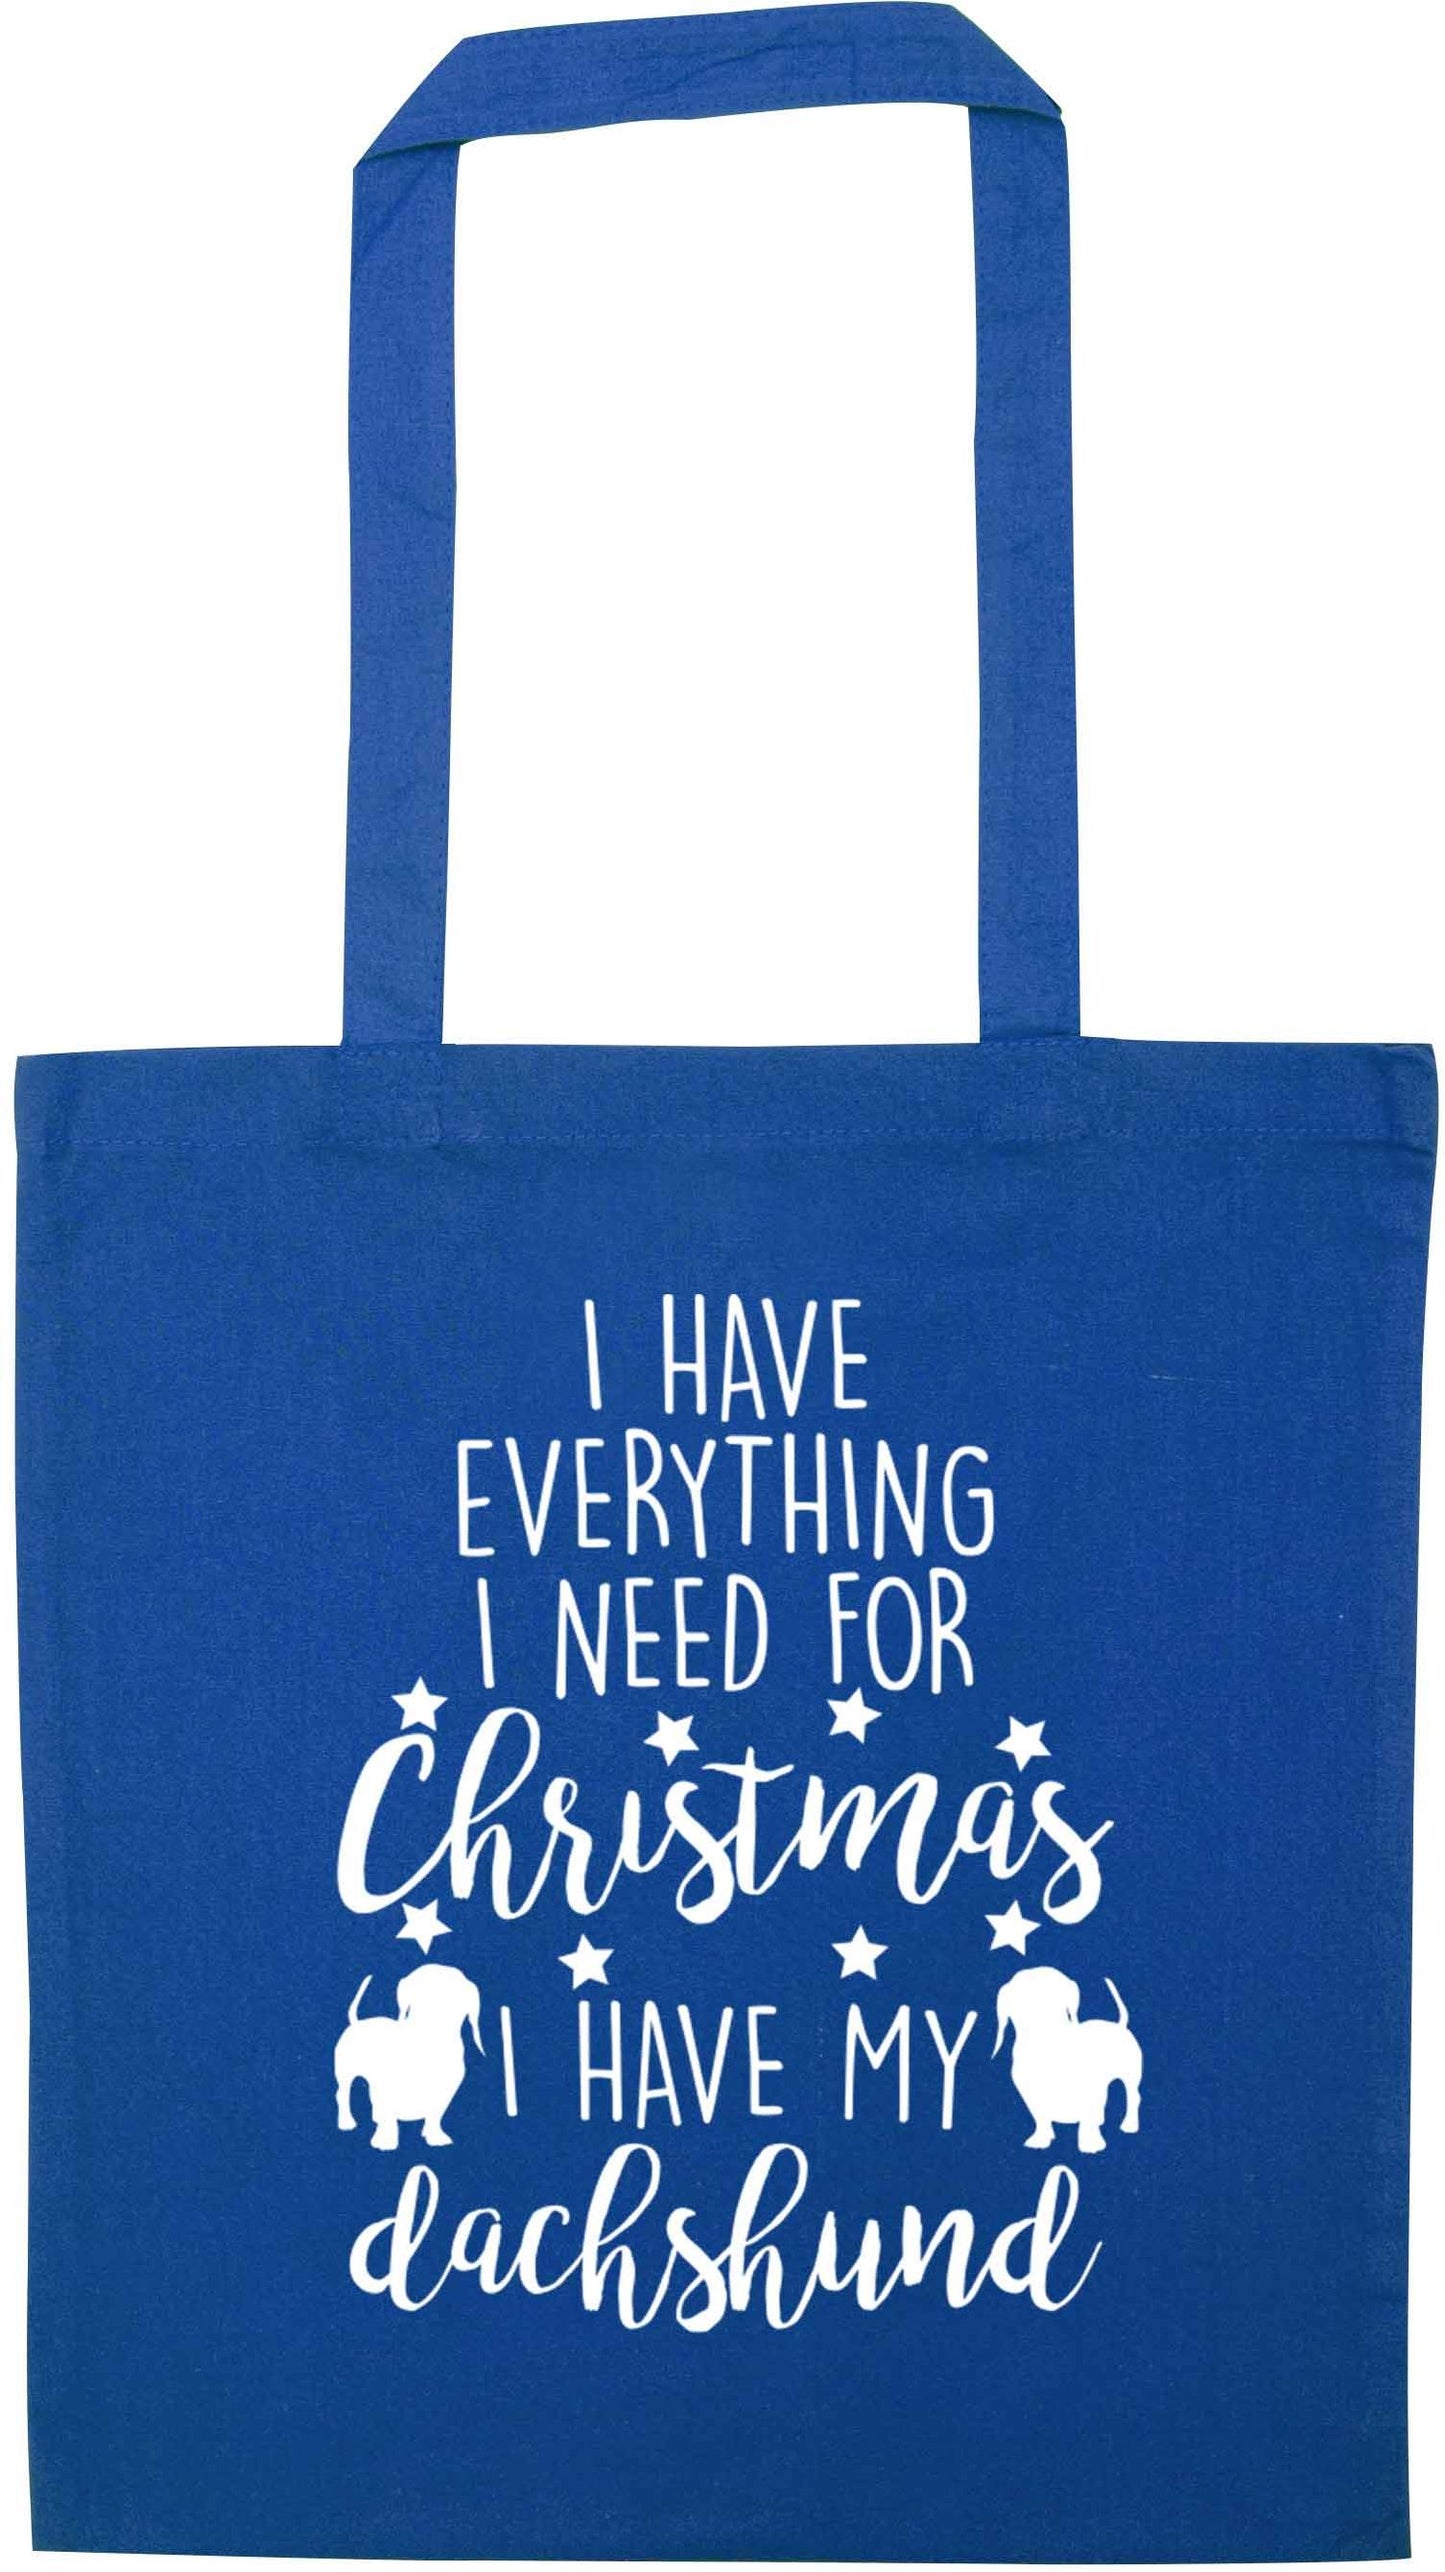 I have everything I need for Christmas I have my dachshund blue tote bag